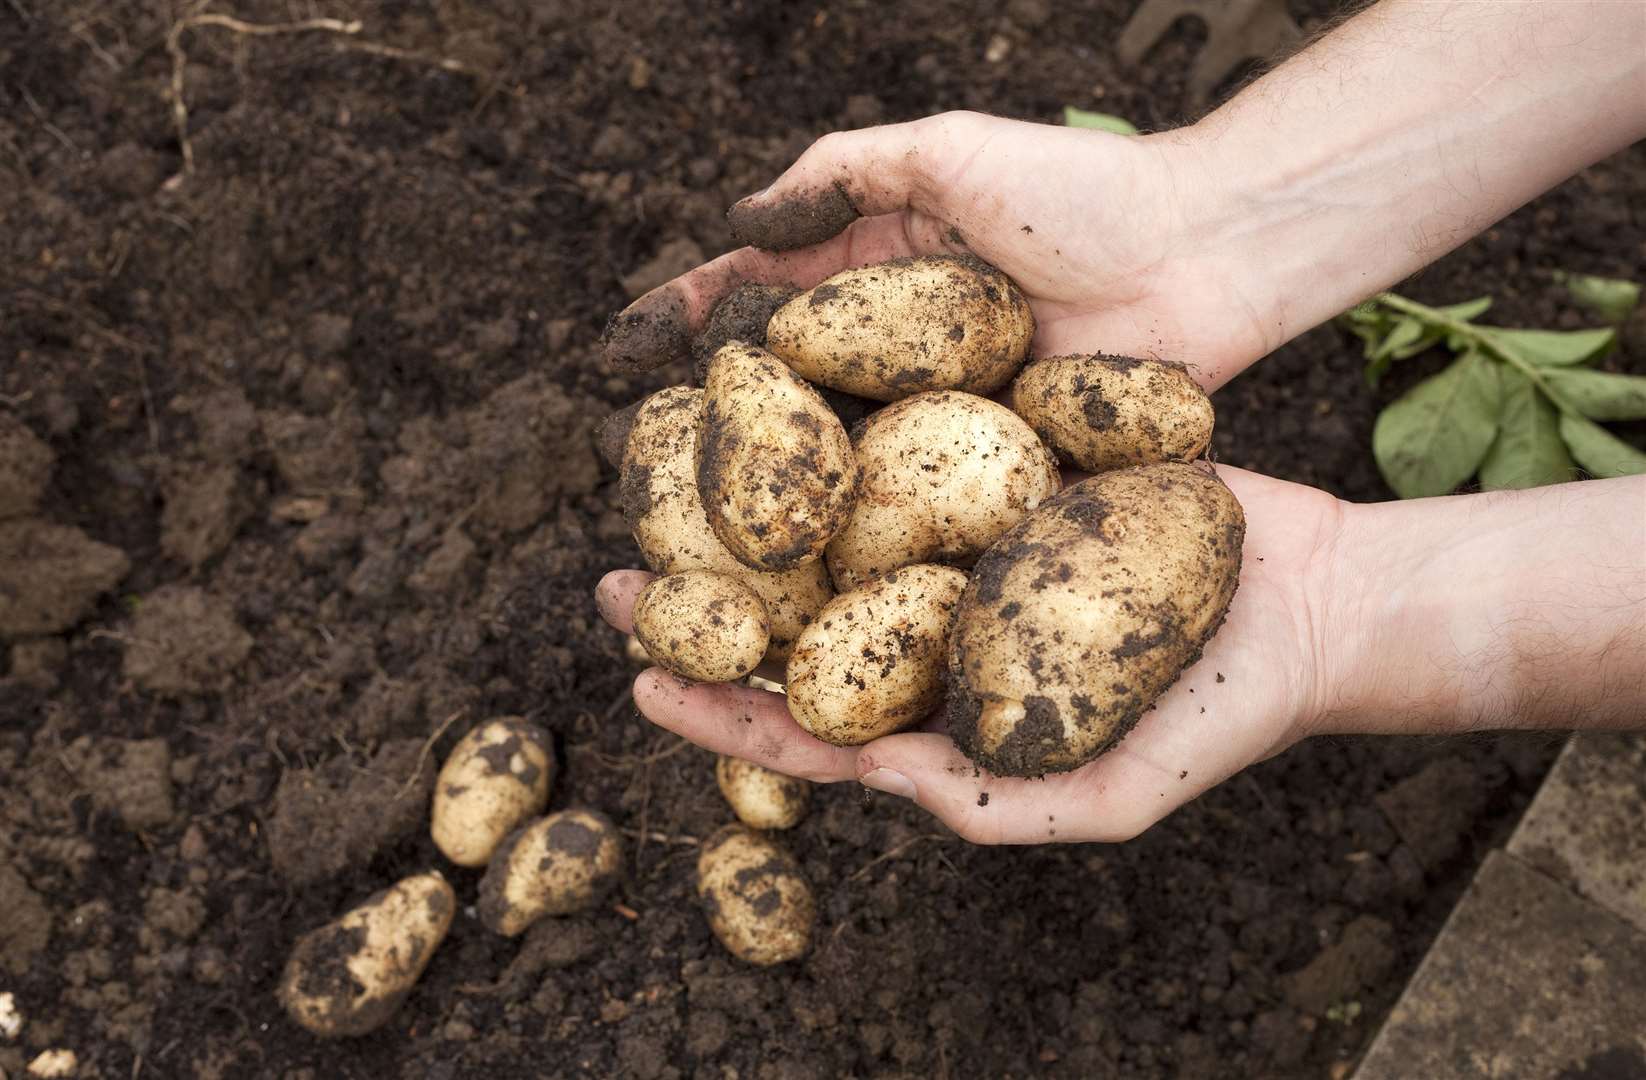 Potatoes have been at the centre of wrangling over imports and exports to and from the EU.